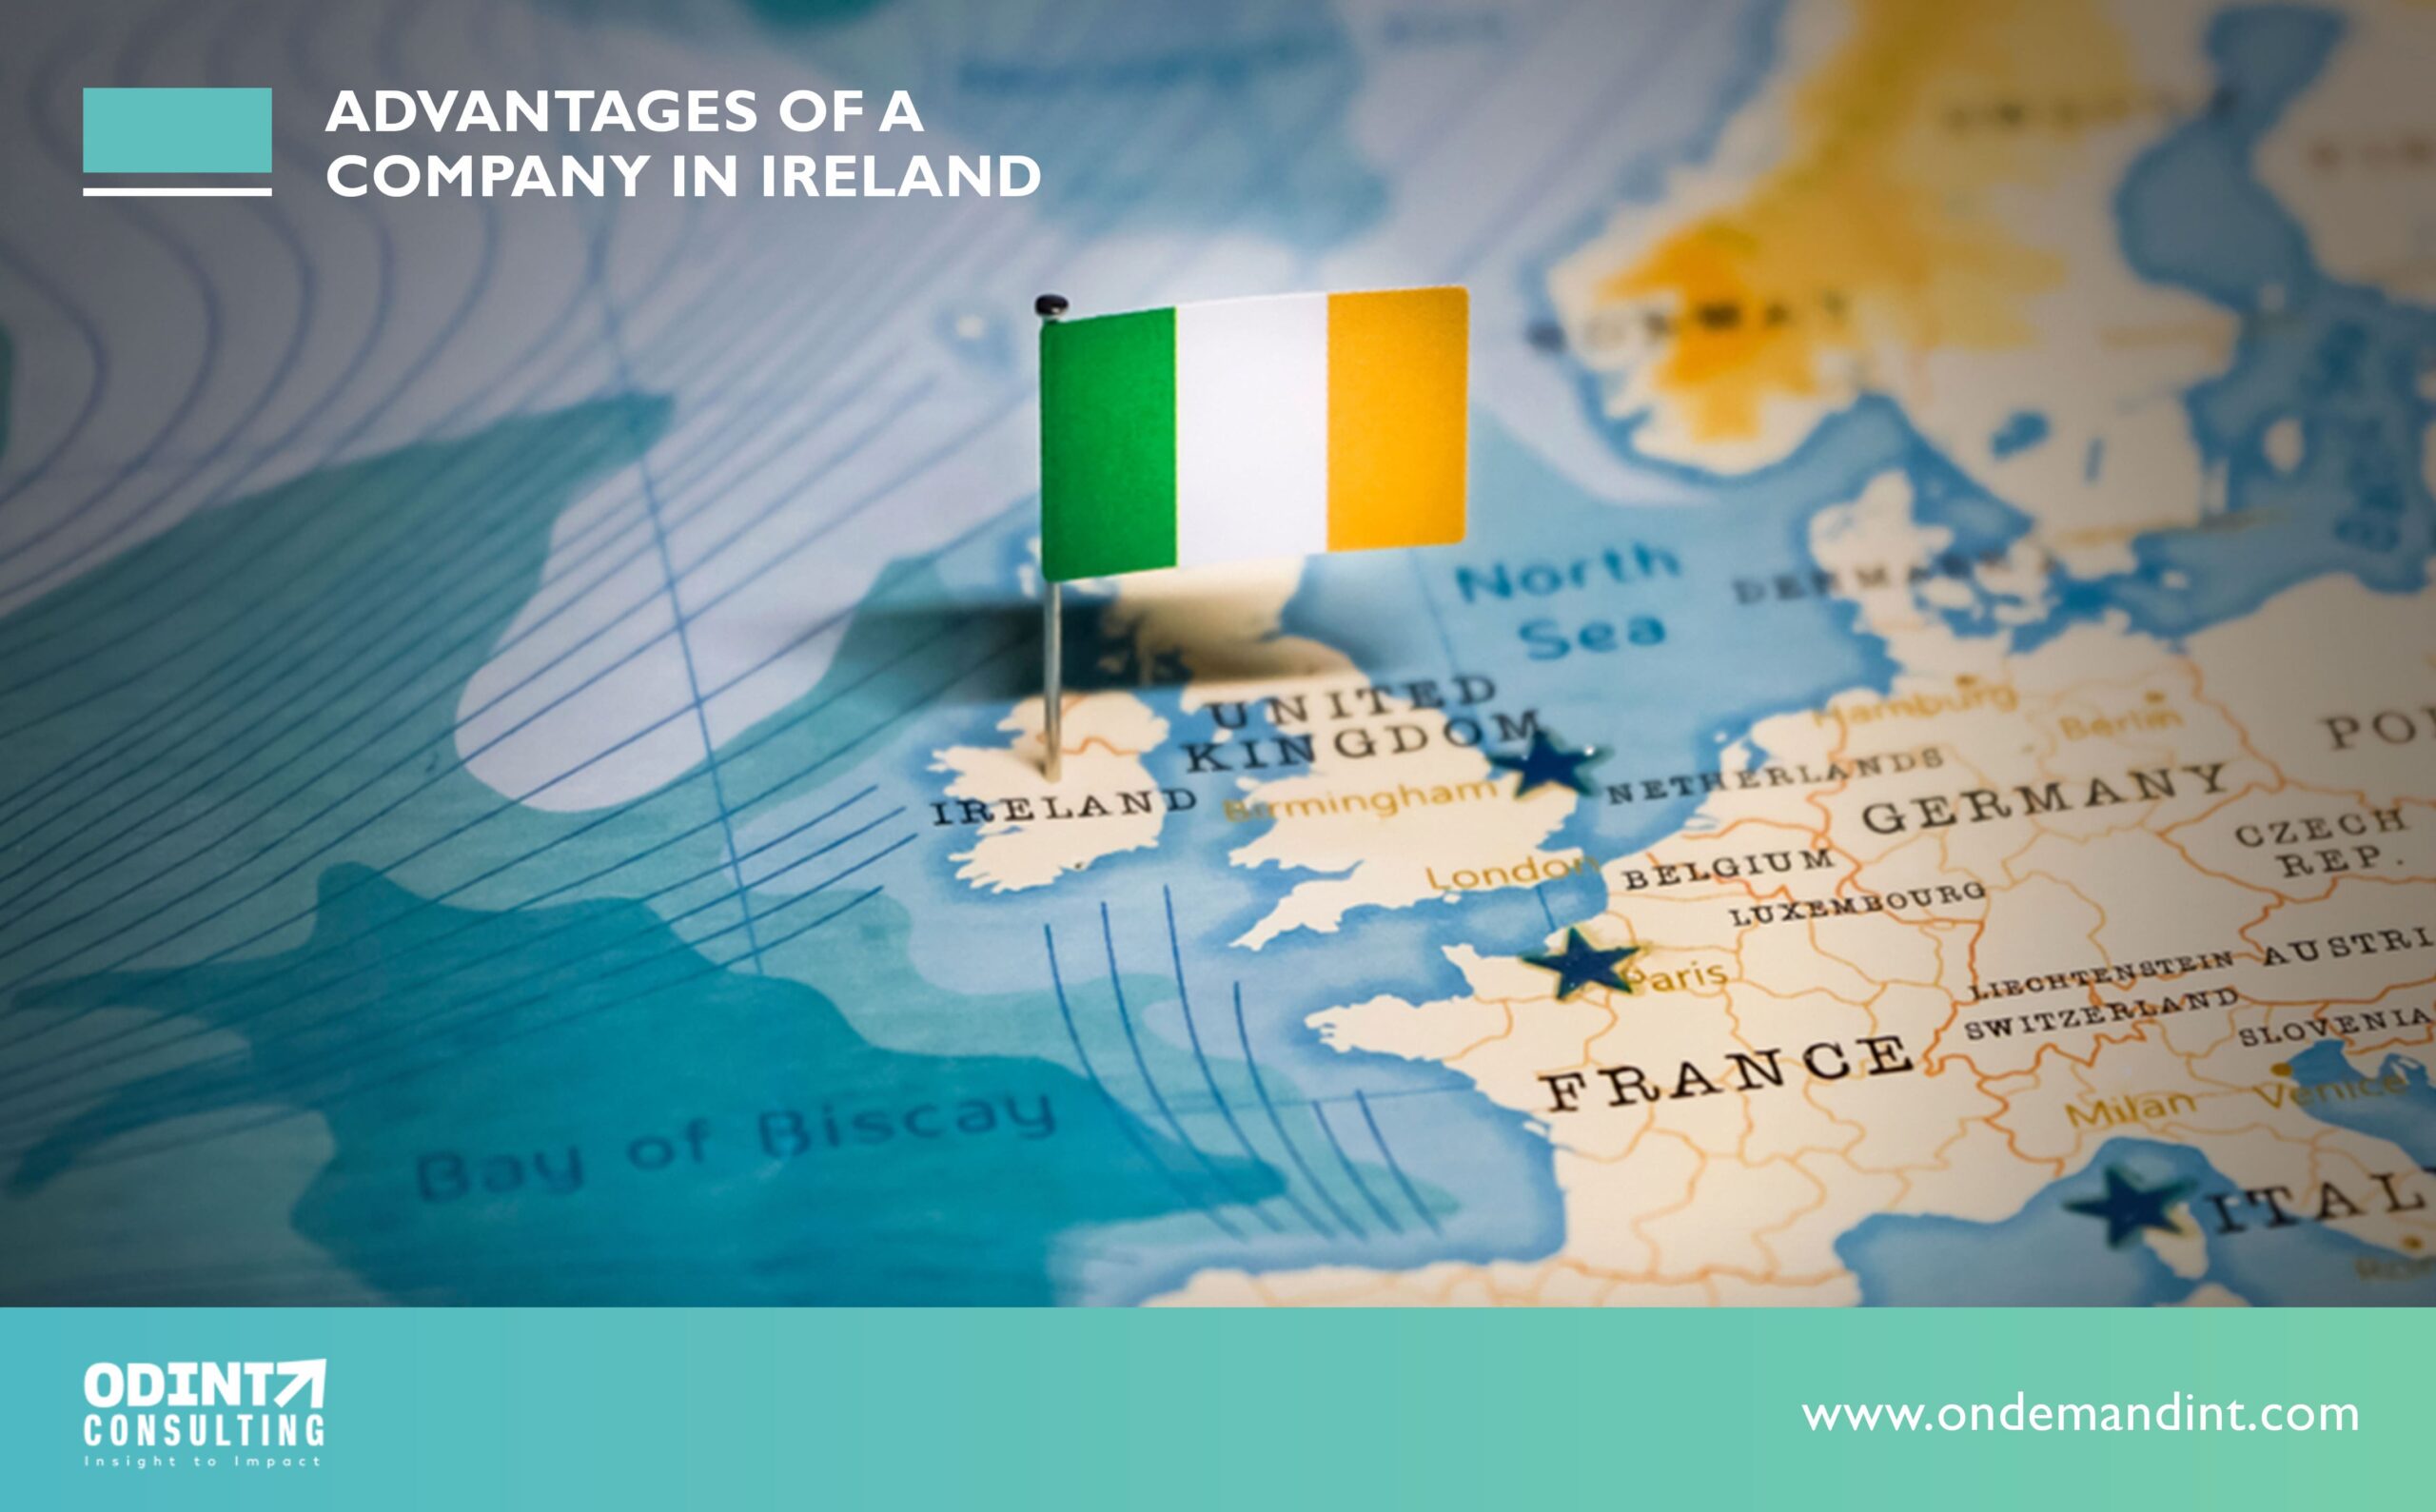 8 Advantages of a Company in Ireland